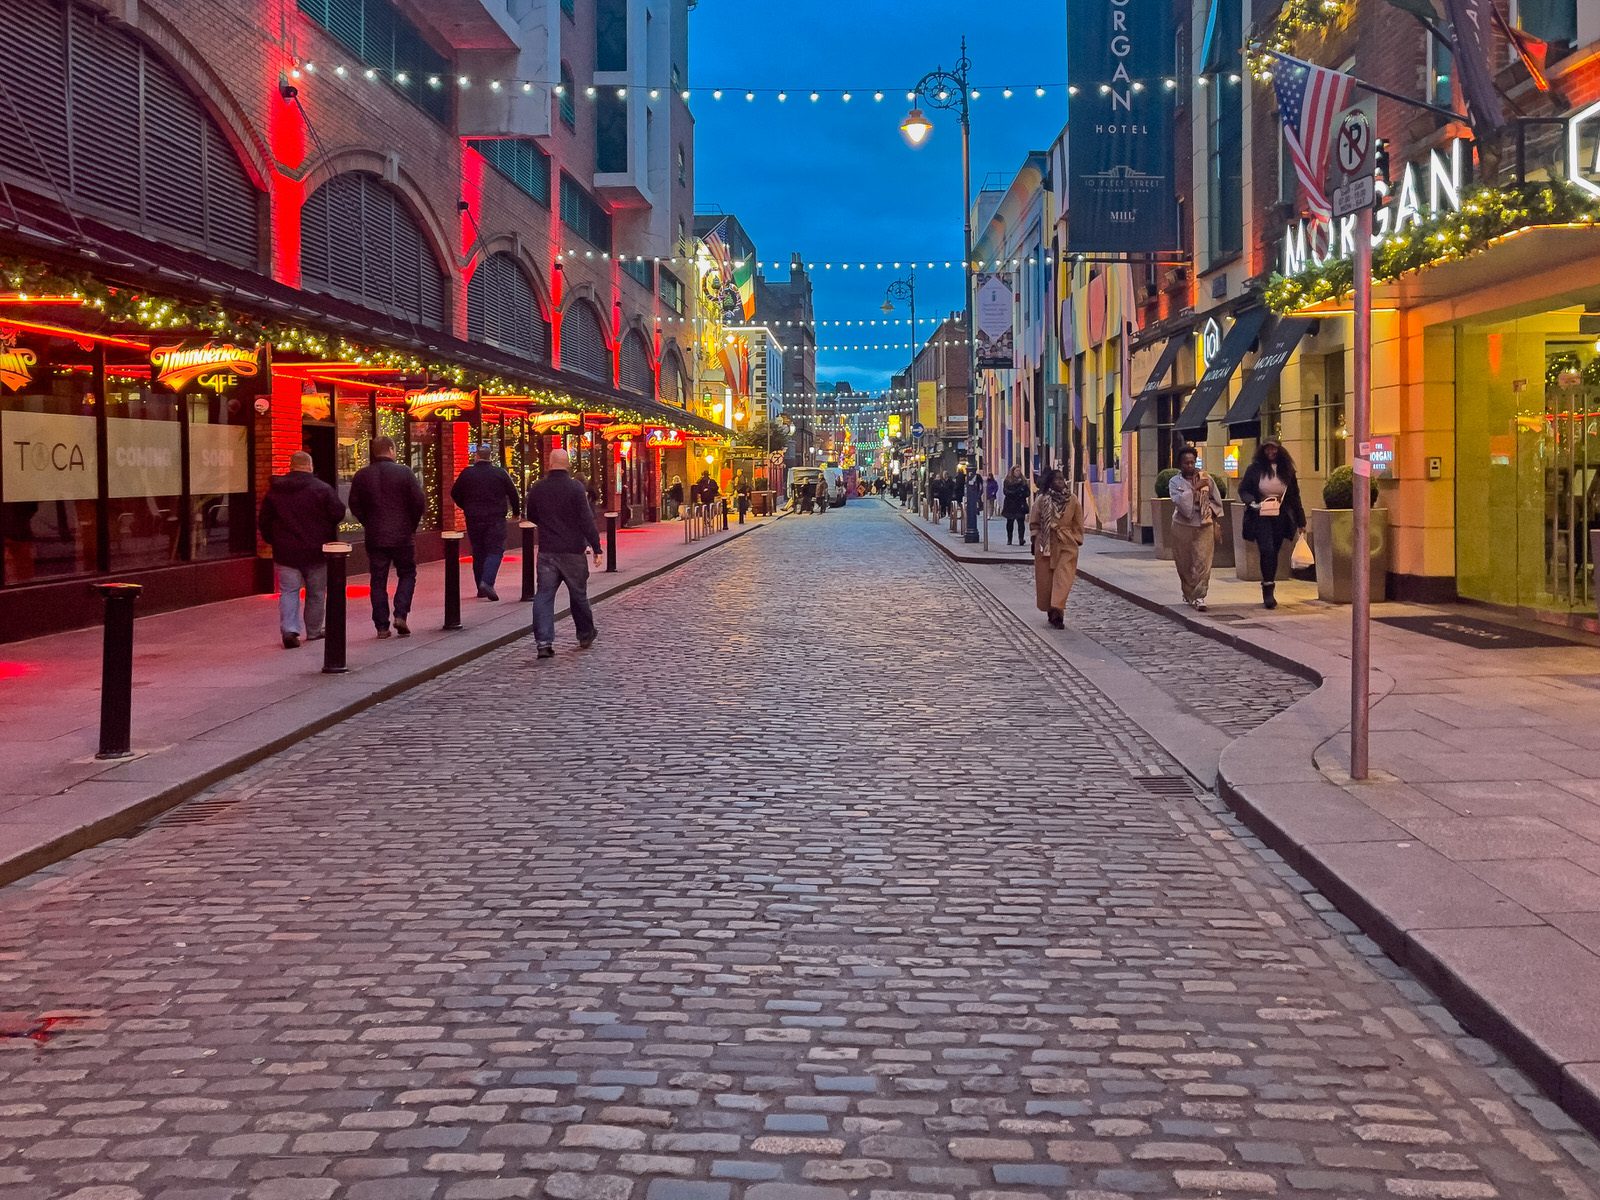 I VISITED TEMPLE BAR TODAY [AS NIGHTFALL WAS APPROACHING]-225330-1